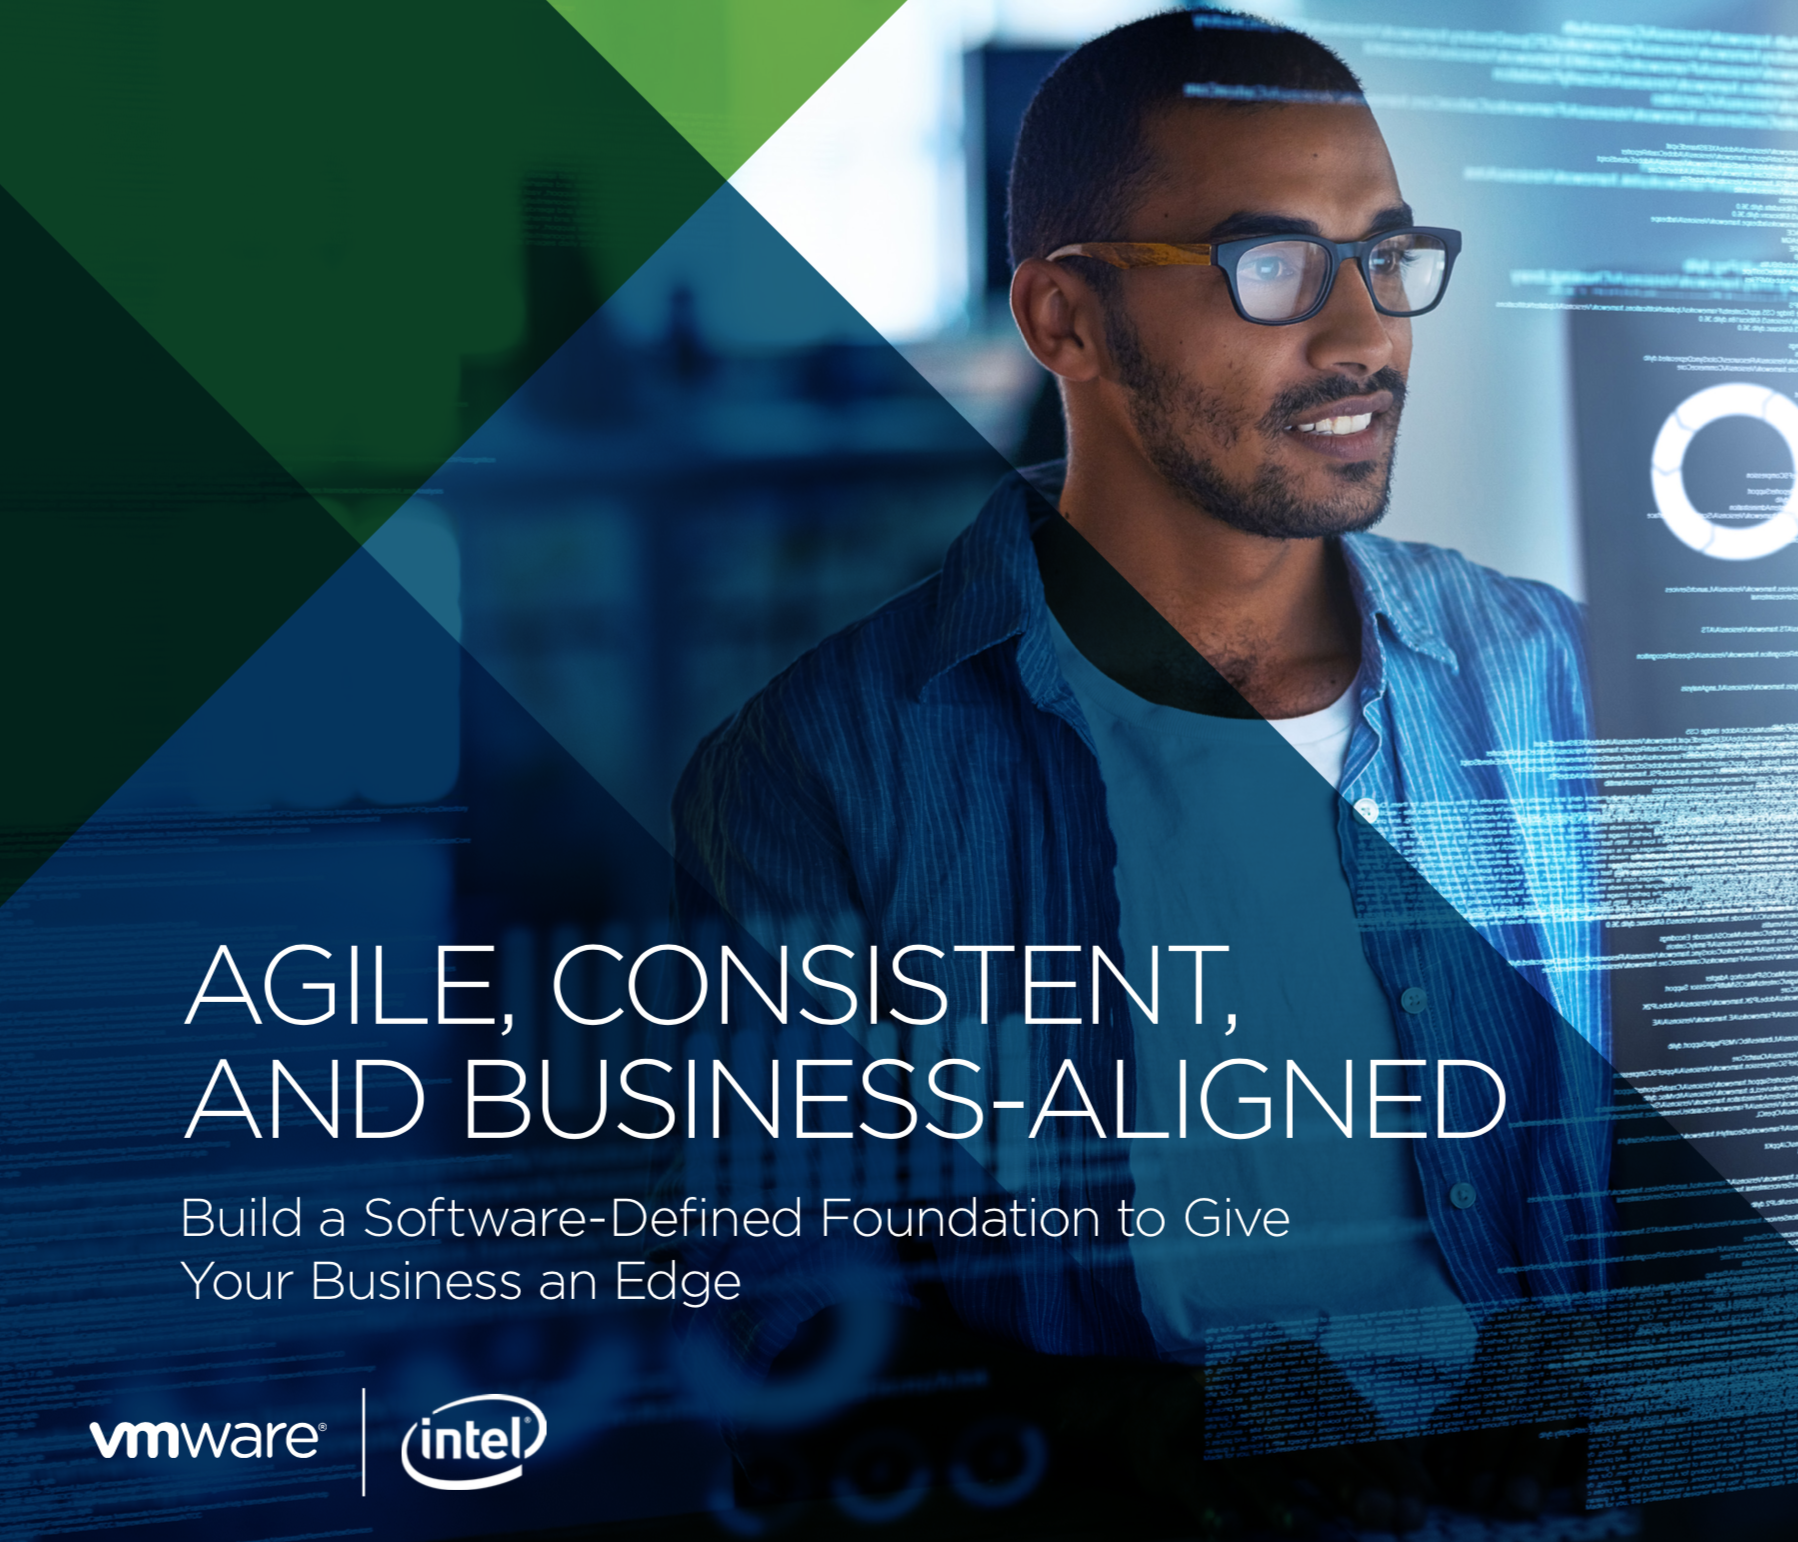 Agile, Consistent, And Business-Aligned - Build a Software-Defined Foundation to Give Your Business an Edge